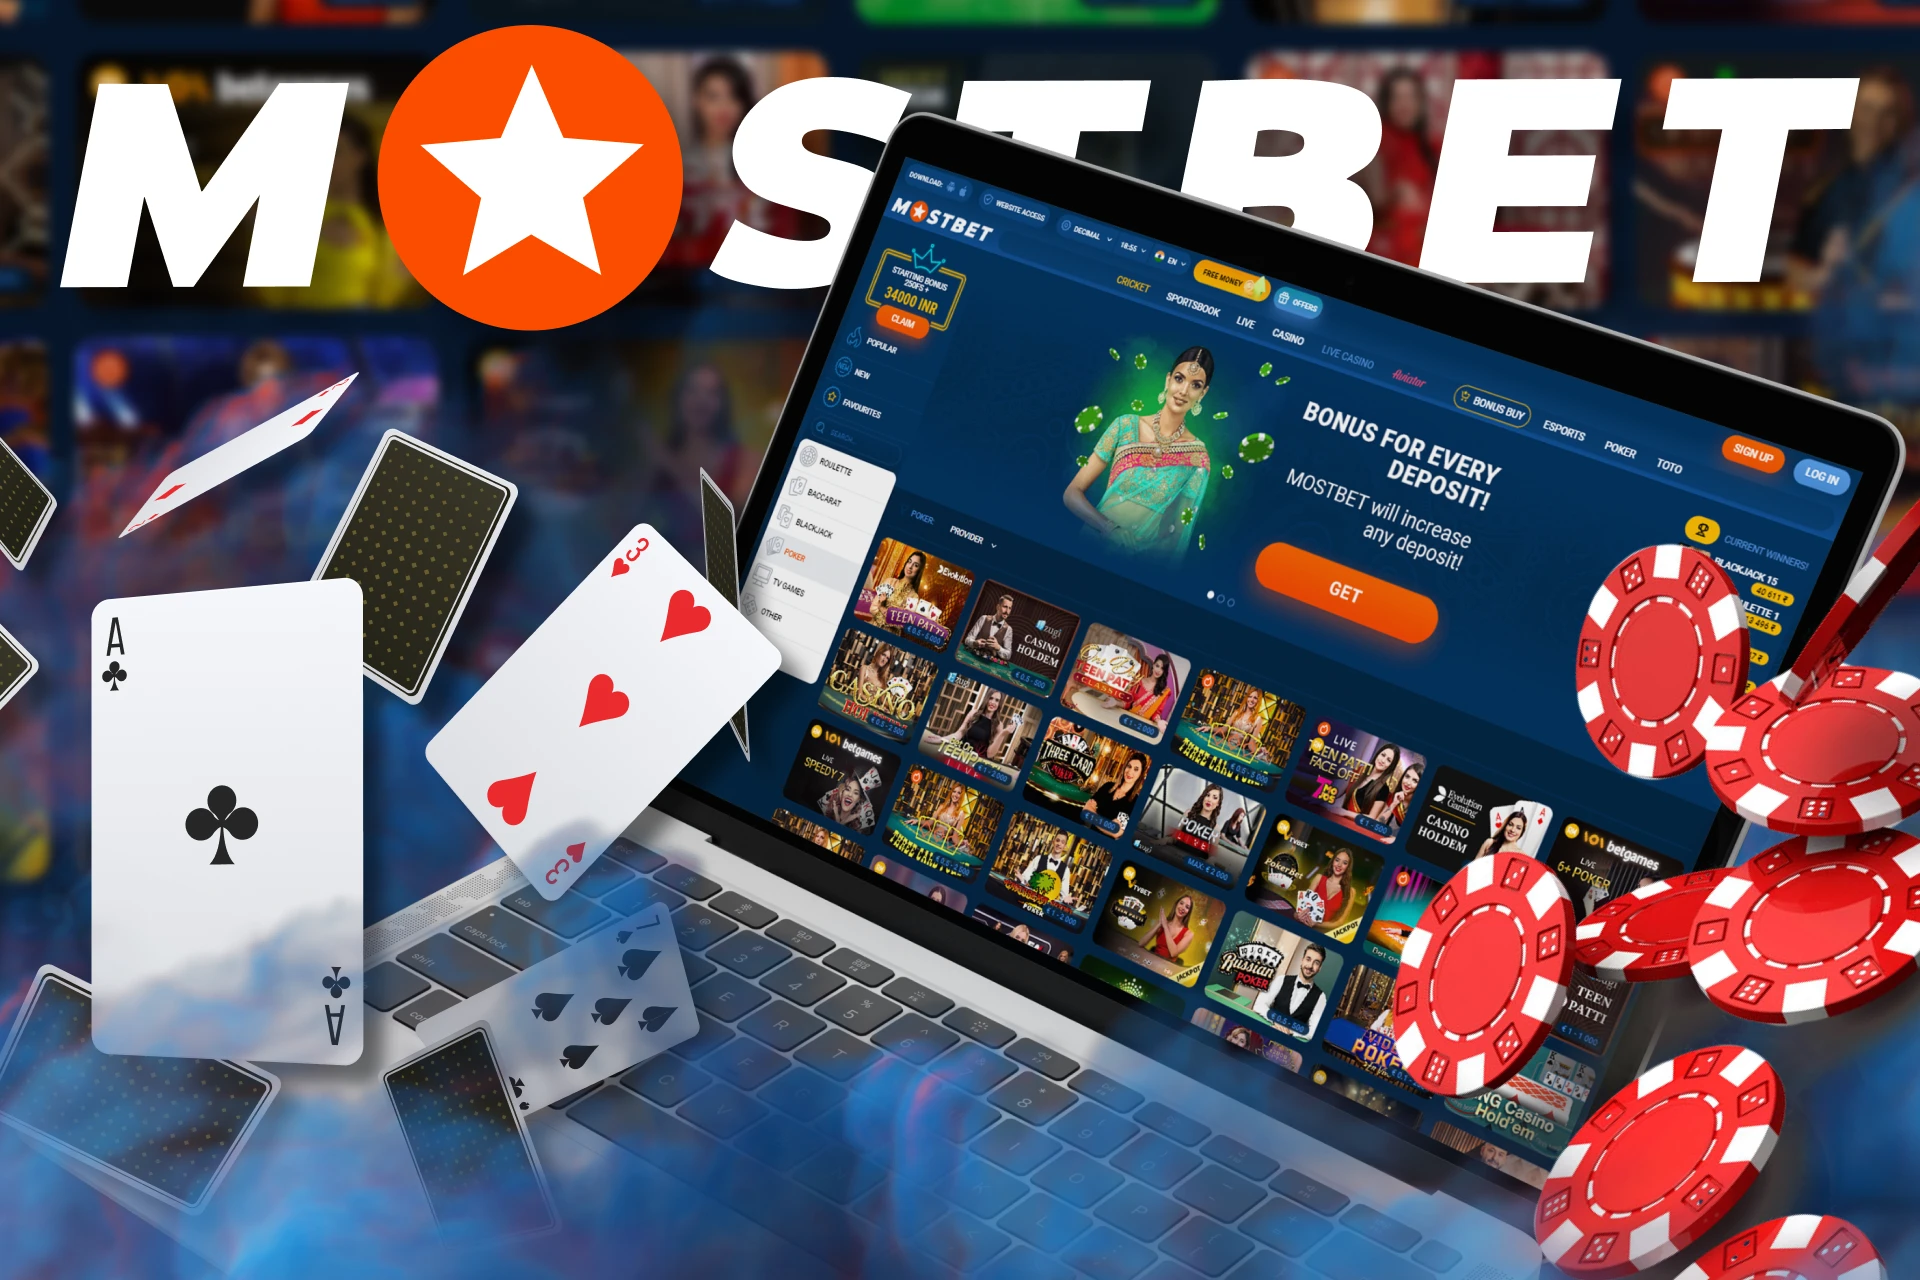 If you like card games, start playing poker at Mostbet.